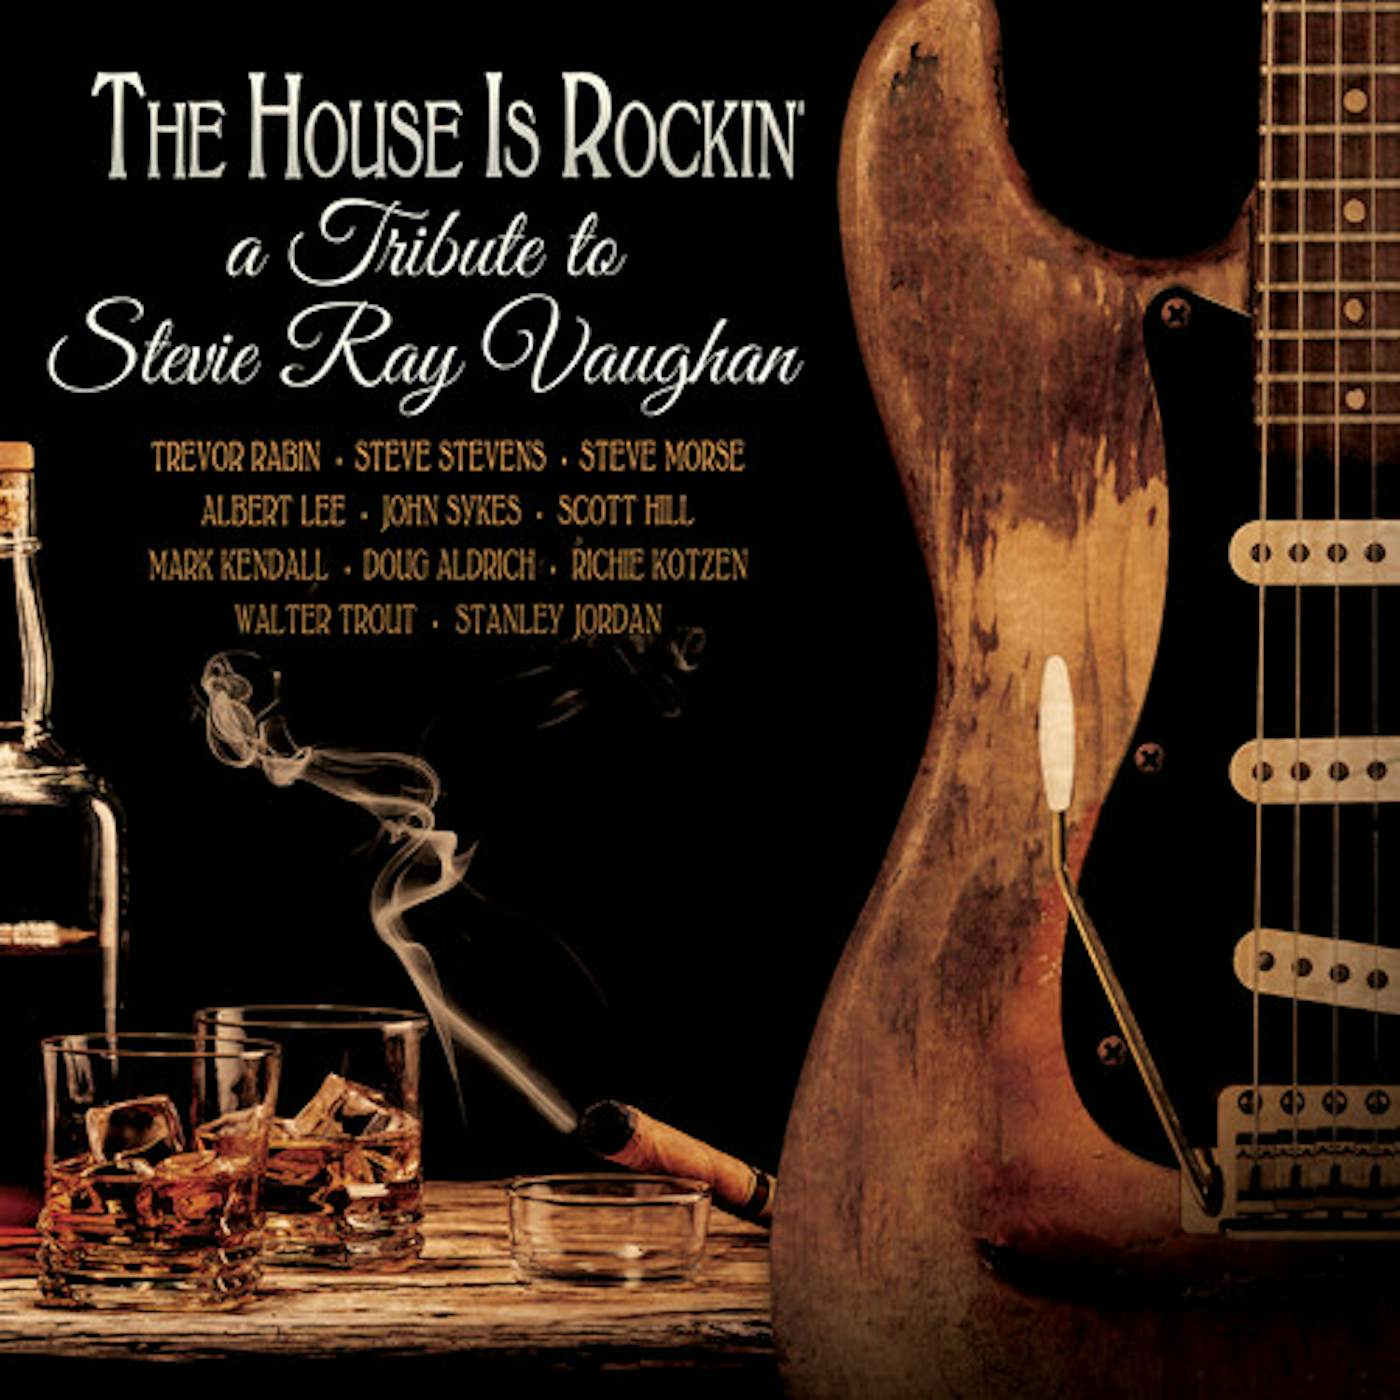 Trevor Rabin House Is Rockin' - A Tribute To Stevie Ray Vaughan Vinyl Record